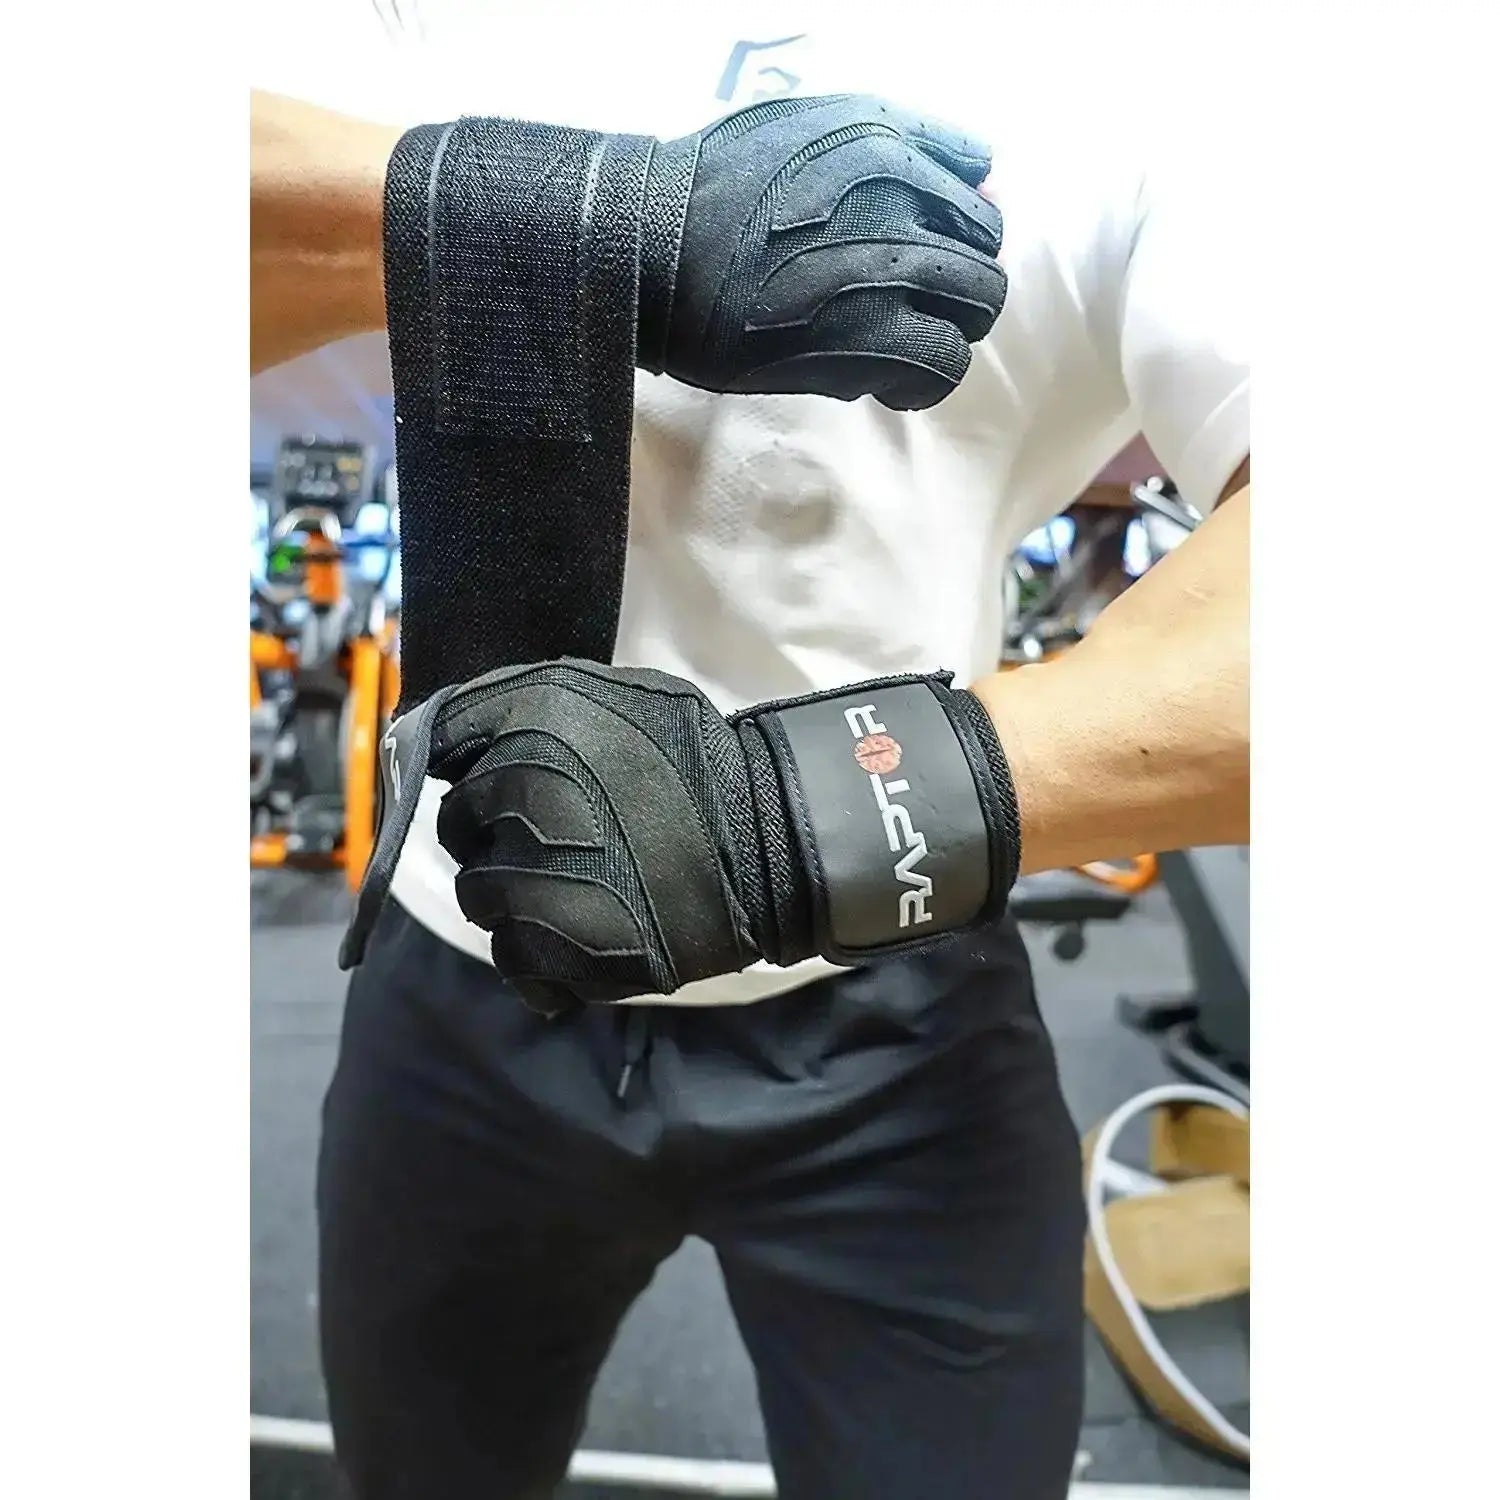 Clearance - Raptor Weightlifting Gloves with Integrated Heavy 18 Inch Wrist Wraps - Gunsmith Fitness